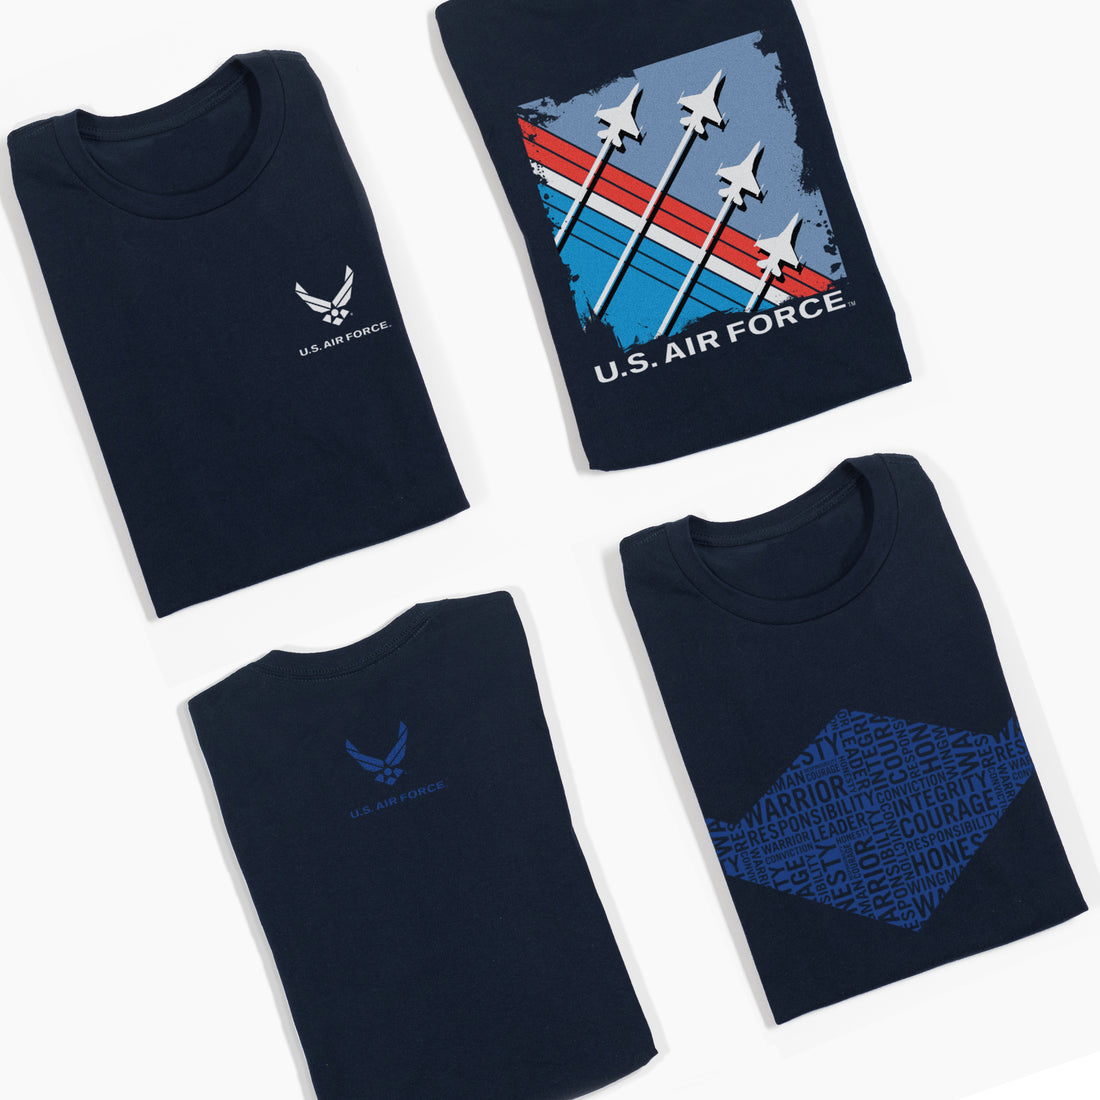 Air Force Shirts for Military 